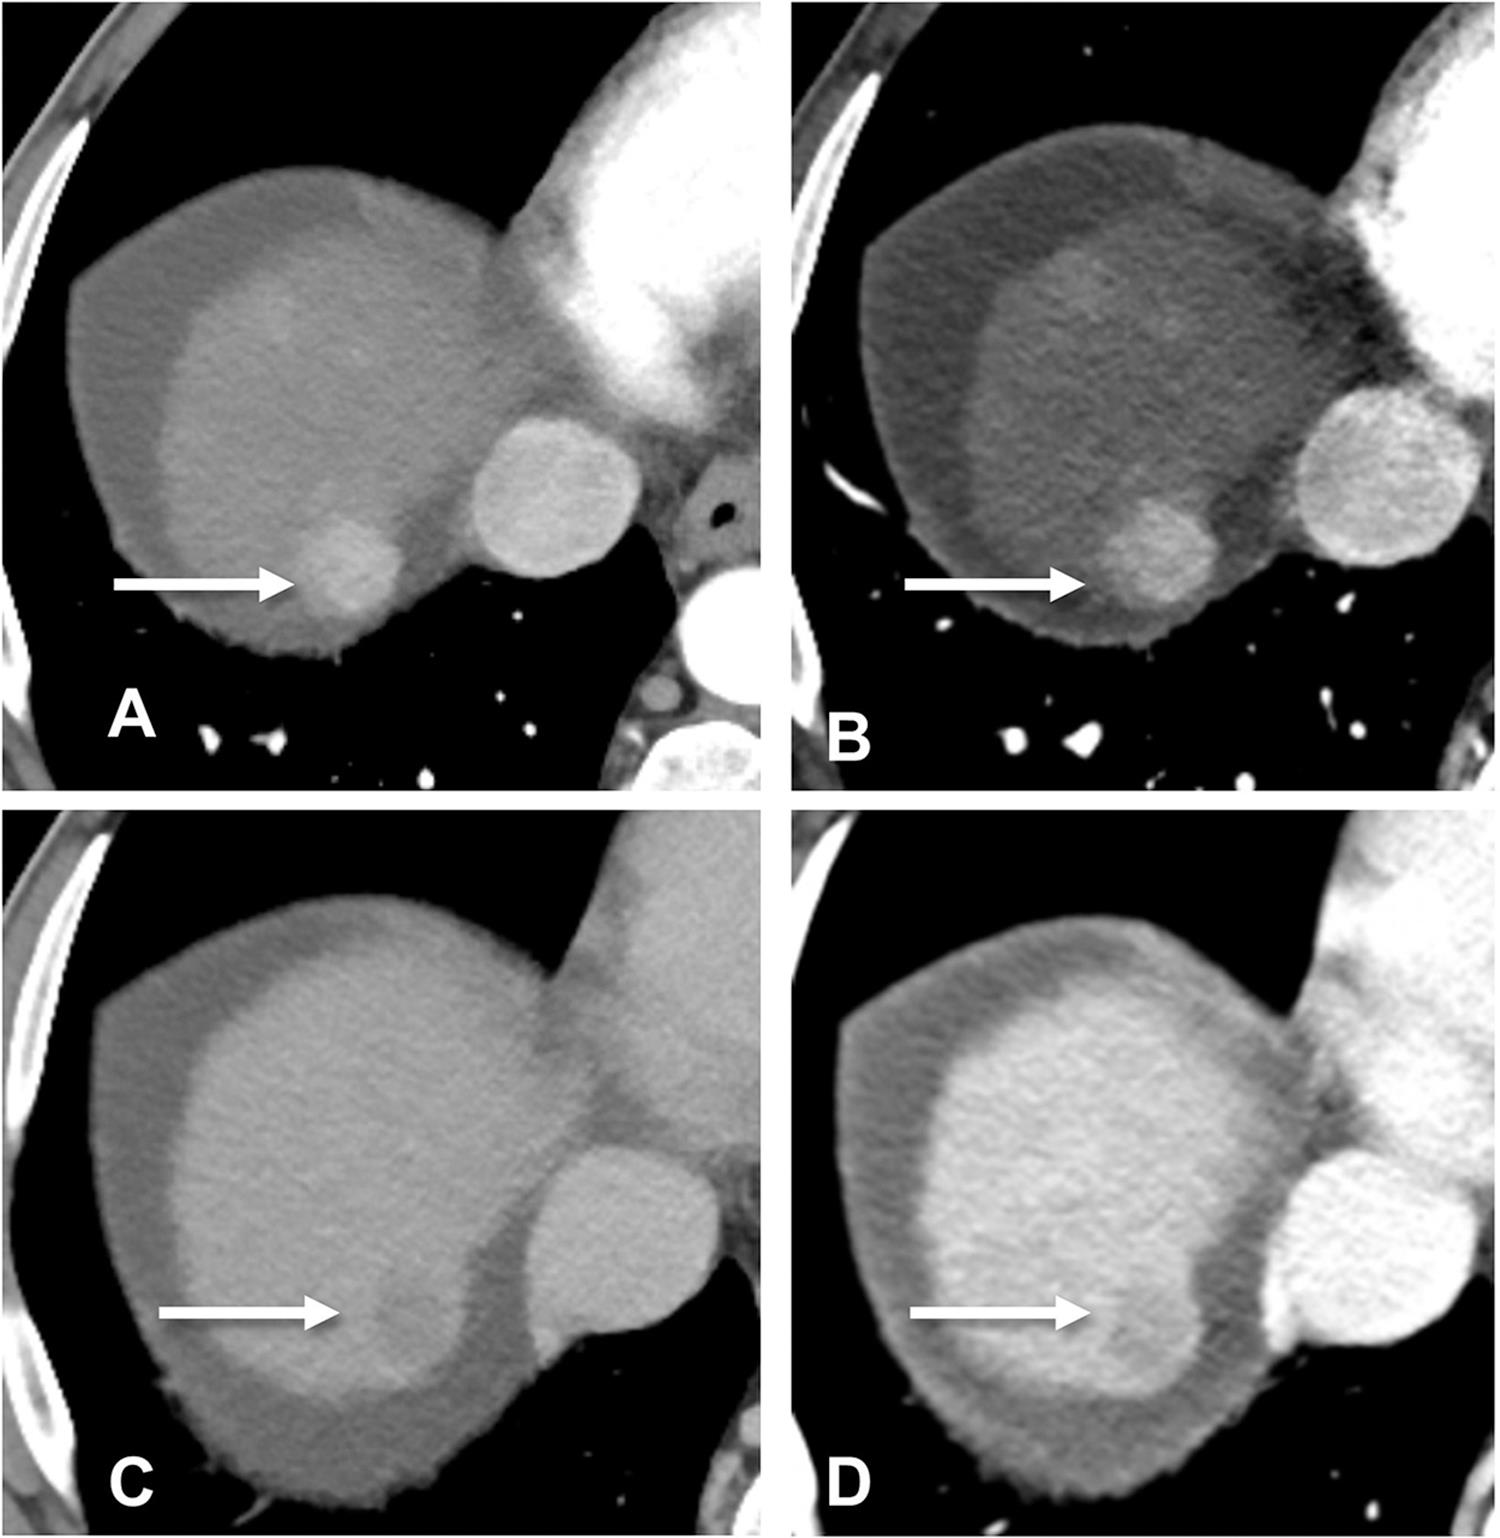 Dual-energy computed tomography demonstrating a hepatocellular carcinoma with arterial phase hyperenhancement on 0.6 linear blend (A) and 50 keV (B) imaging.